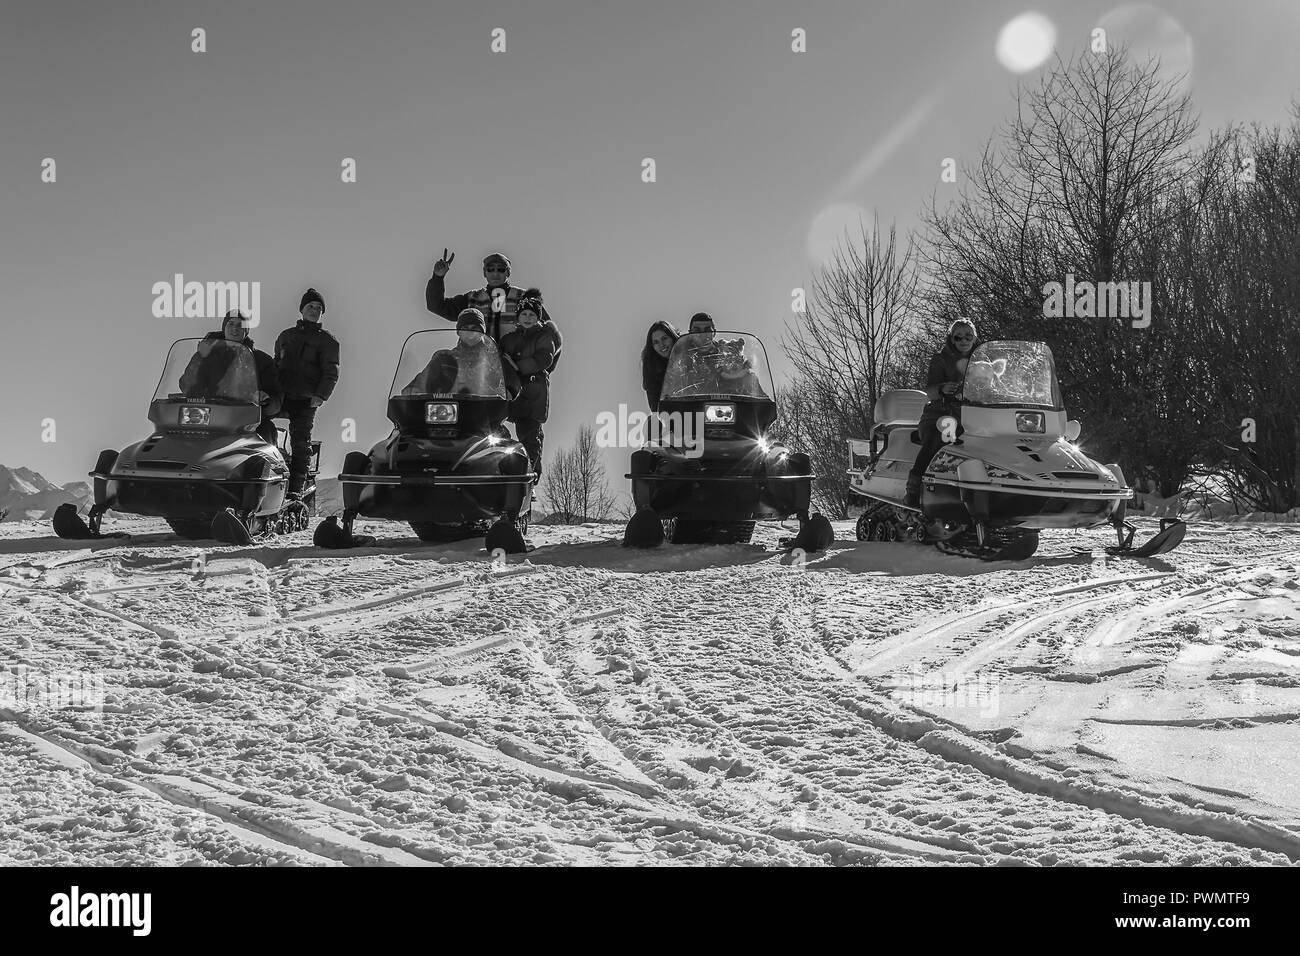 Adygea, Russia - January 23,  2017: Young happy men, women and children on the snowmobiles Yamaha on a snowy slope winter Sunny day, black and white p Stock Photo